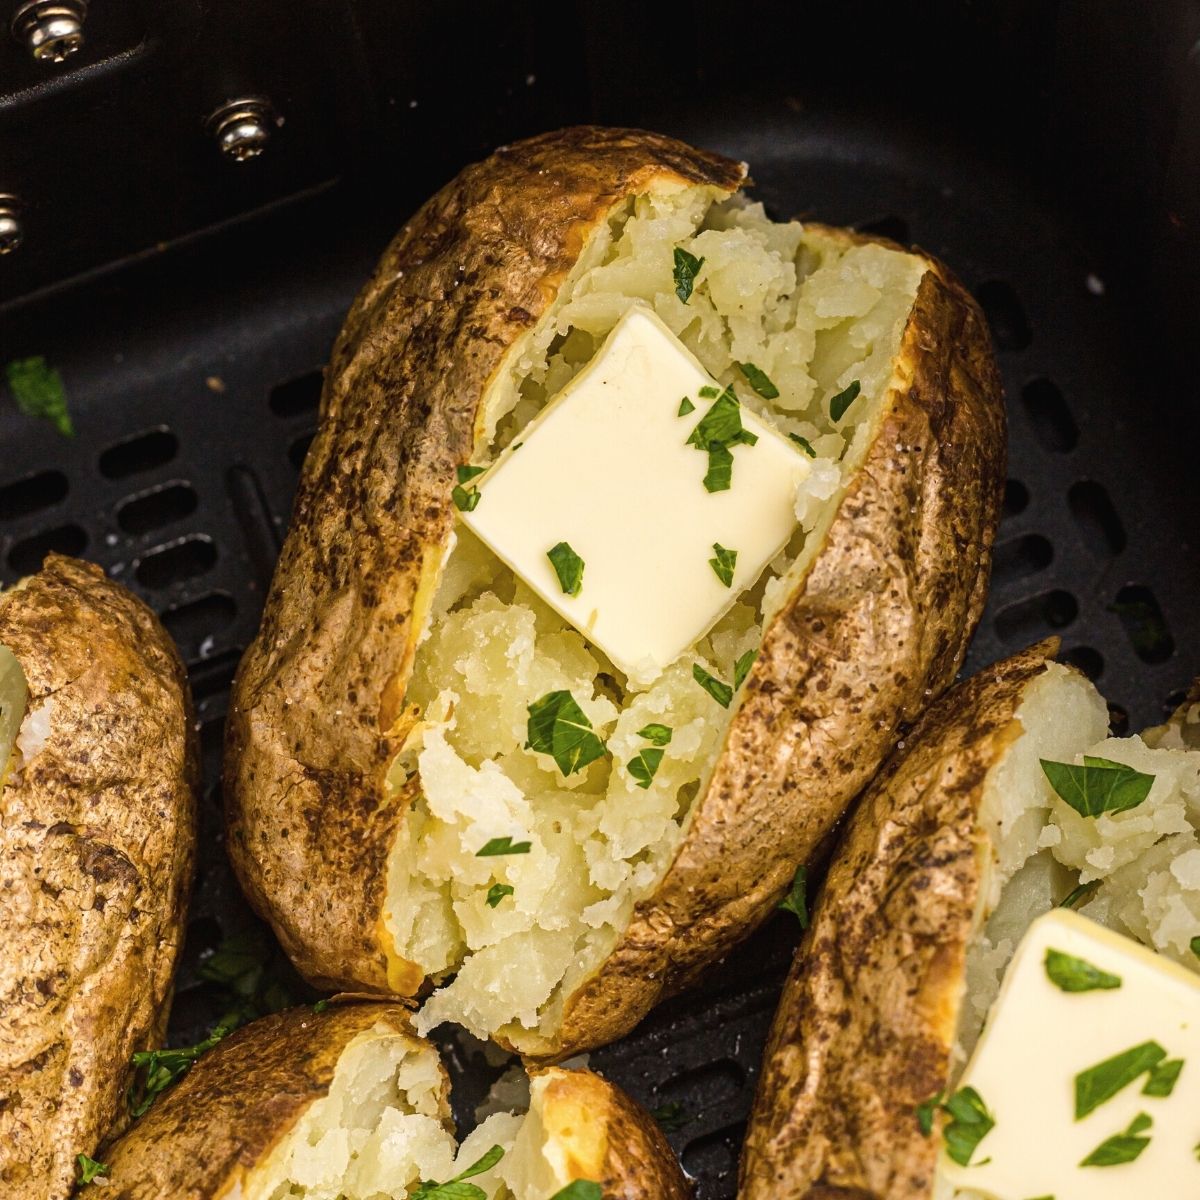 Golden baked potatoes in the air fryer basket after being cooked with butter and parsley flakes